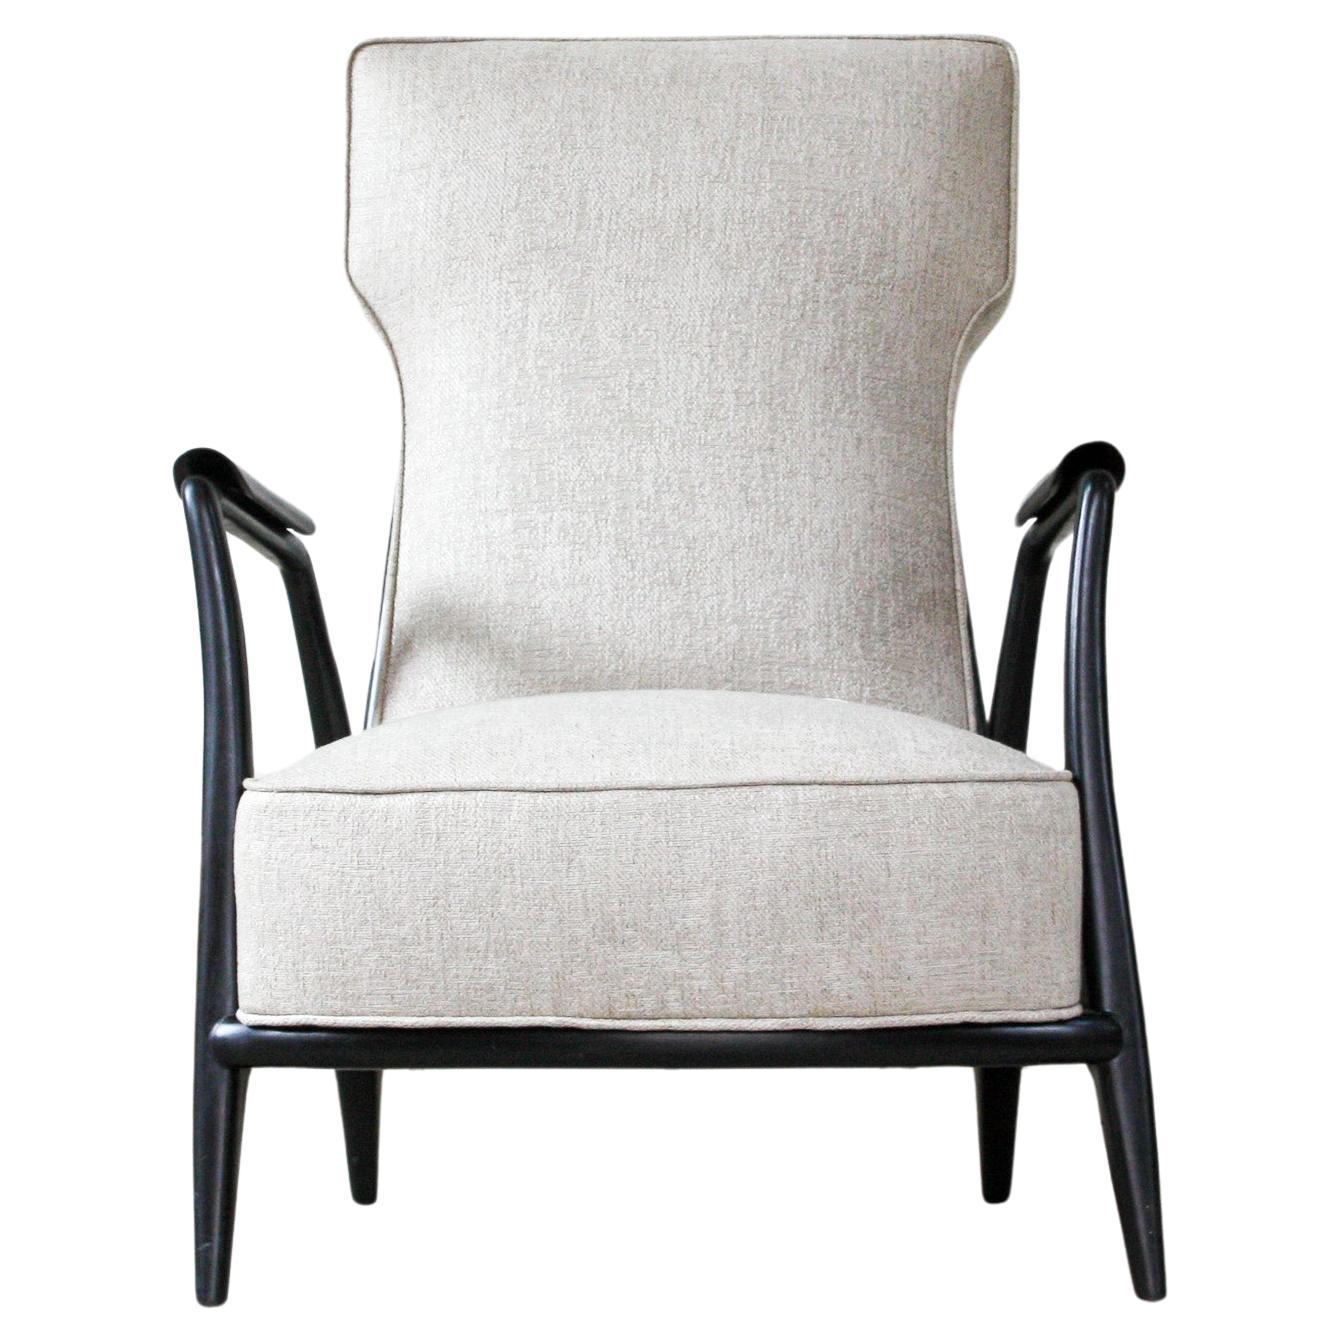 Available today, this sculptural Mid-Century Modern armchair in hardwood and grey fabric by Giuseppe Scapinelli made in the fifties is absolutely gorgeous!

The vintage armchair is made in Pau Marfim hardwood with Ebony finish in light gray